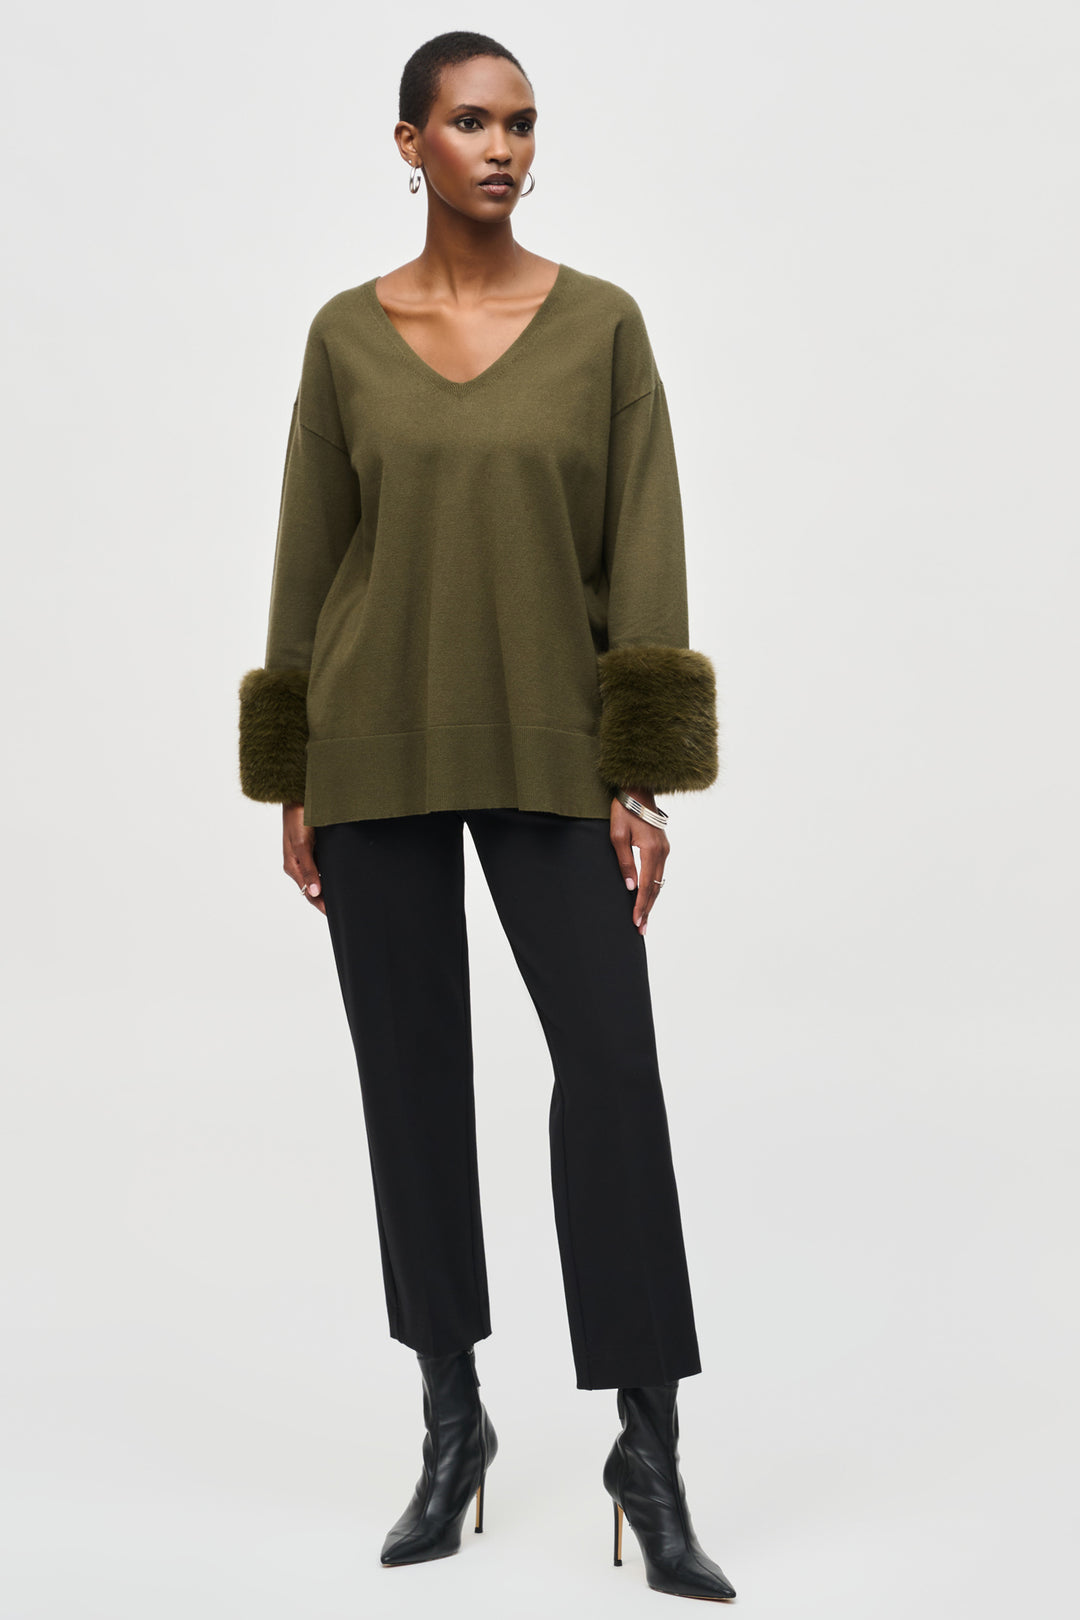 Joseph Ribkoff Fall 2024 Expertly crafted for comfort and style, the Heavy Knit Straight Pant boasts a wider fit and high-rise design. With ankle length and an elastic waist, it's perfect for the office or any moderately formal event. 